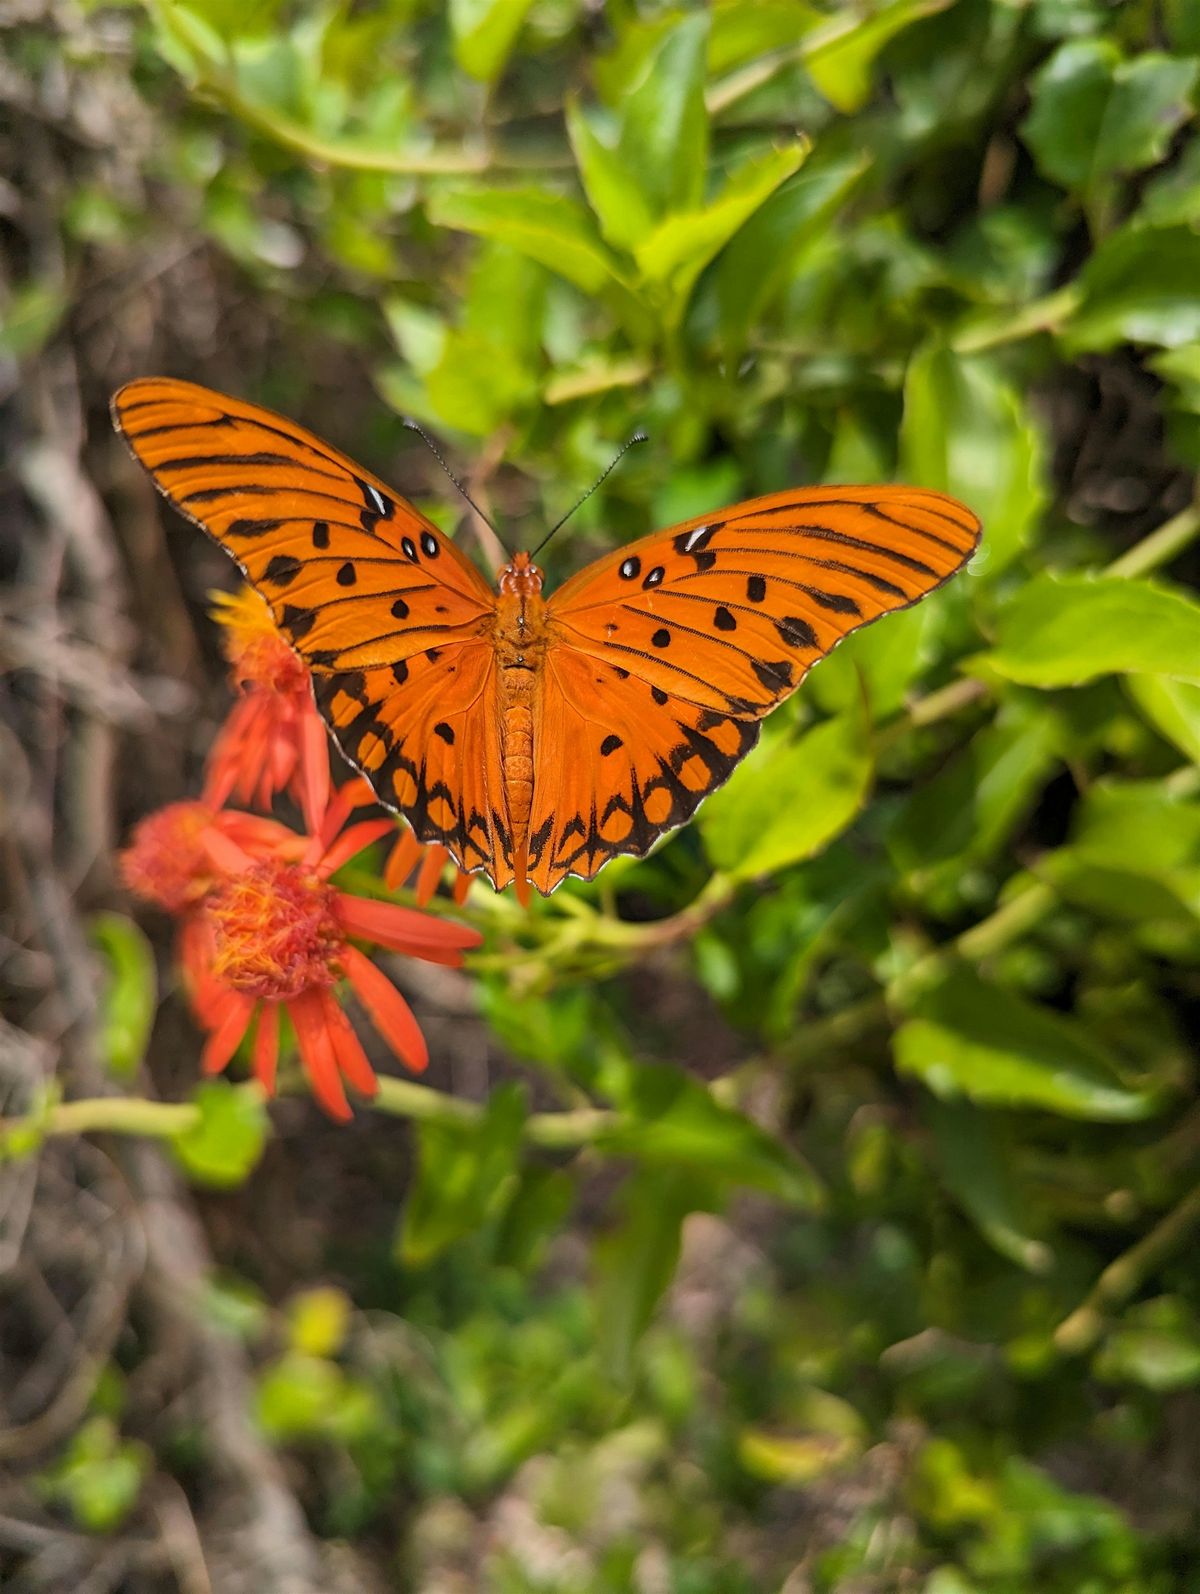 Florida-Friendly Landscaping\u2122 for Wildlife and Pollinators